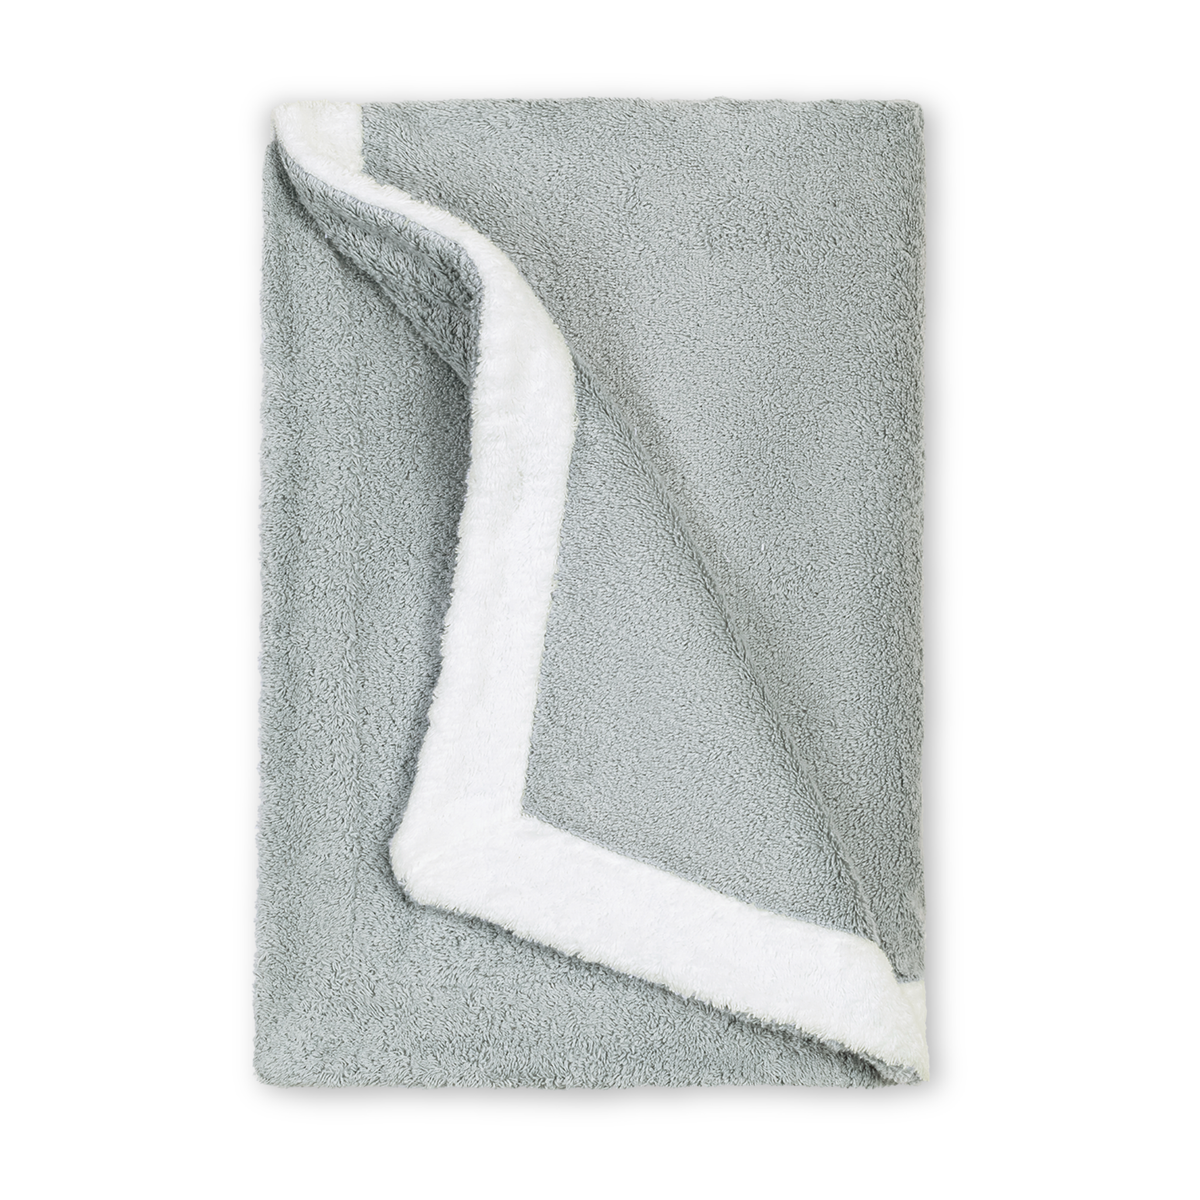 Folded Matouk Helios Beach Towels in Pool/White Color